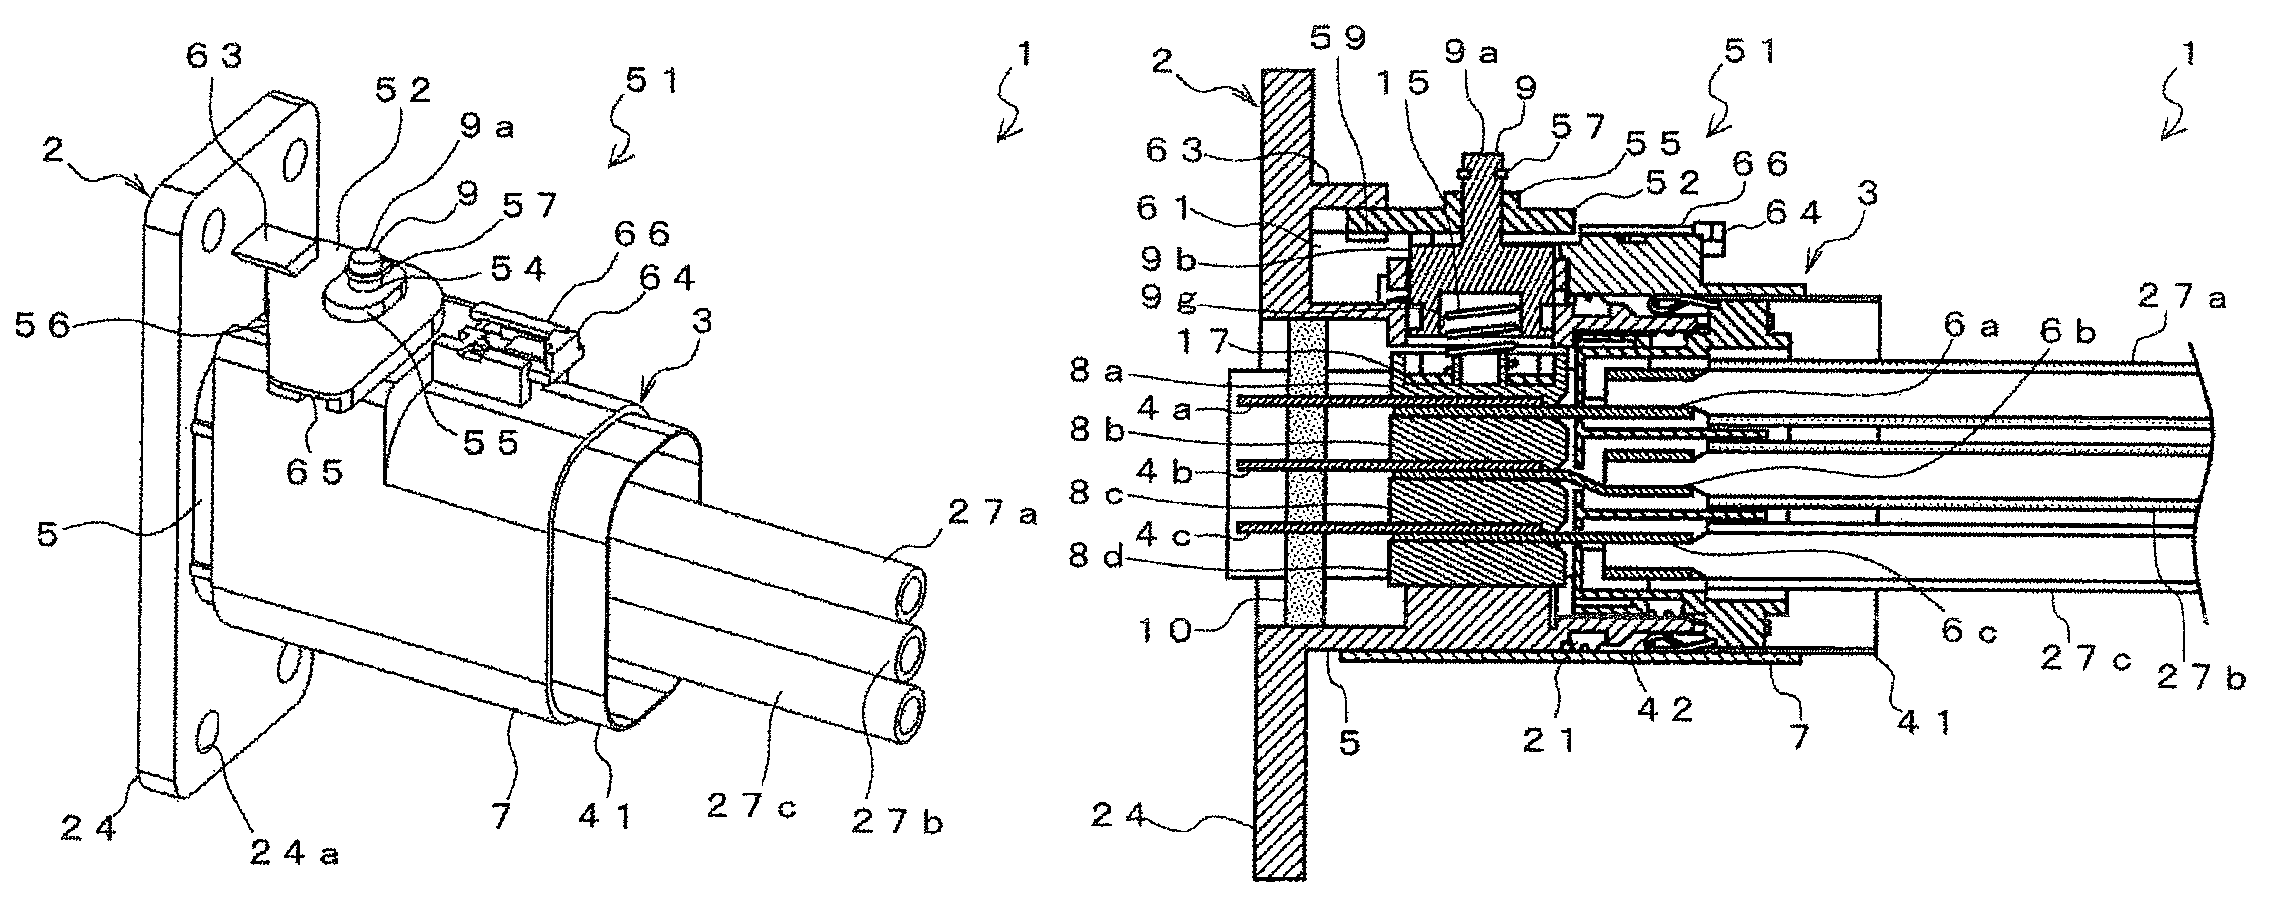 Connector for large power transmission